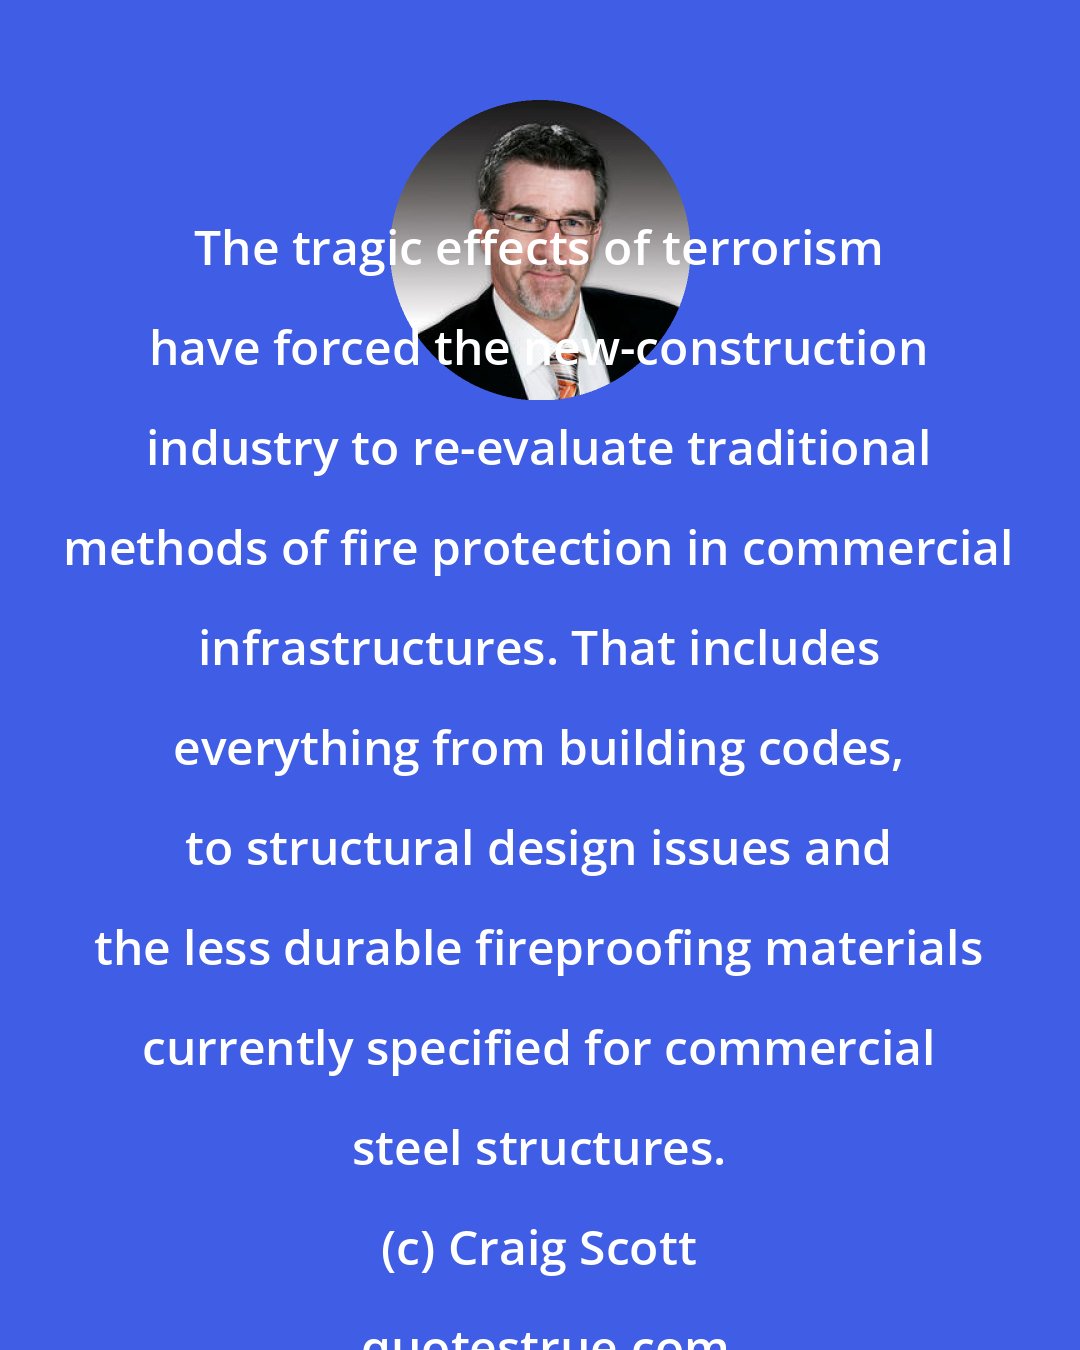 Craig Scott: The tragic effects of terrorism have forced the new-construction industry to re-evaluate traditional methods of fire protection in commercial infrastructures. That includes everything from building codes, to structural design issues and the less durable fireproofing materials currently specified for commercial steel structures.